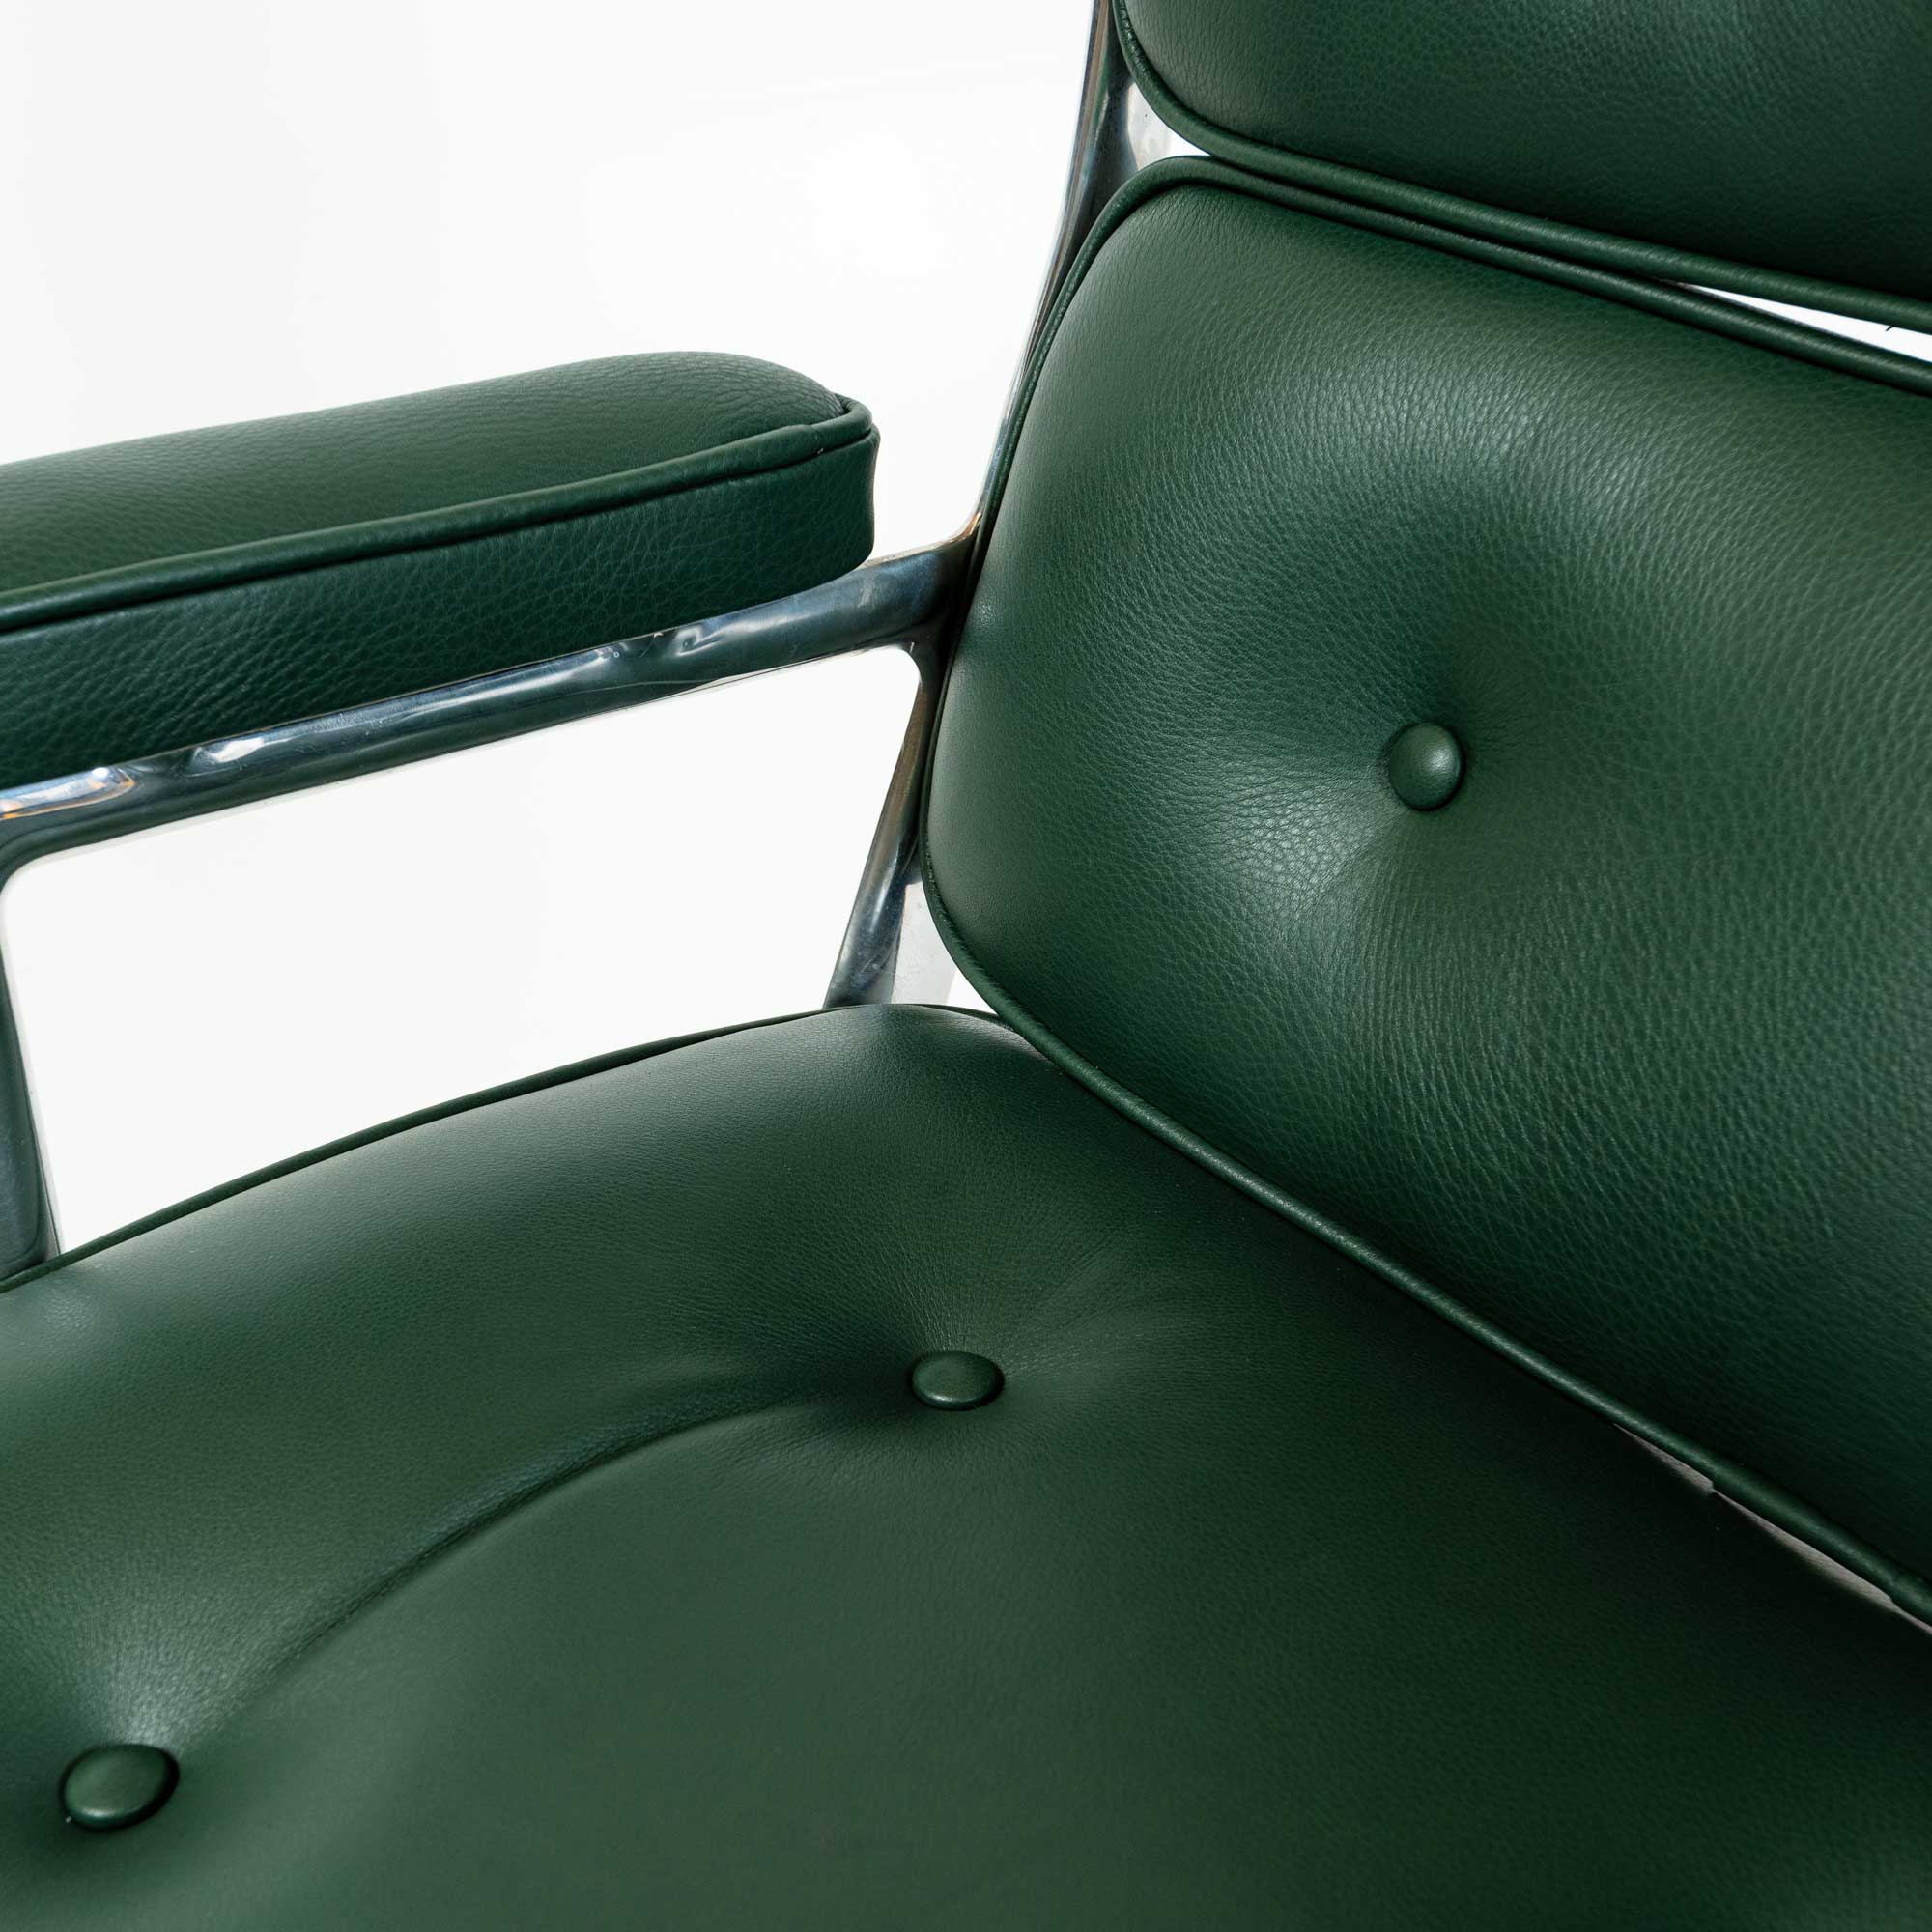 Custom Order: Custom Order First Gen Eames Time Life Lobby Chair in Green Leather